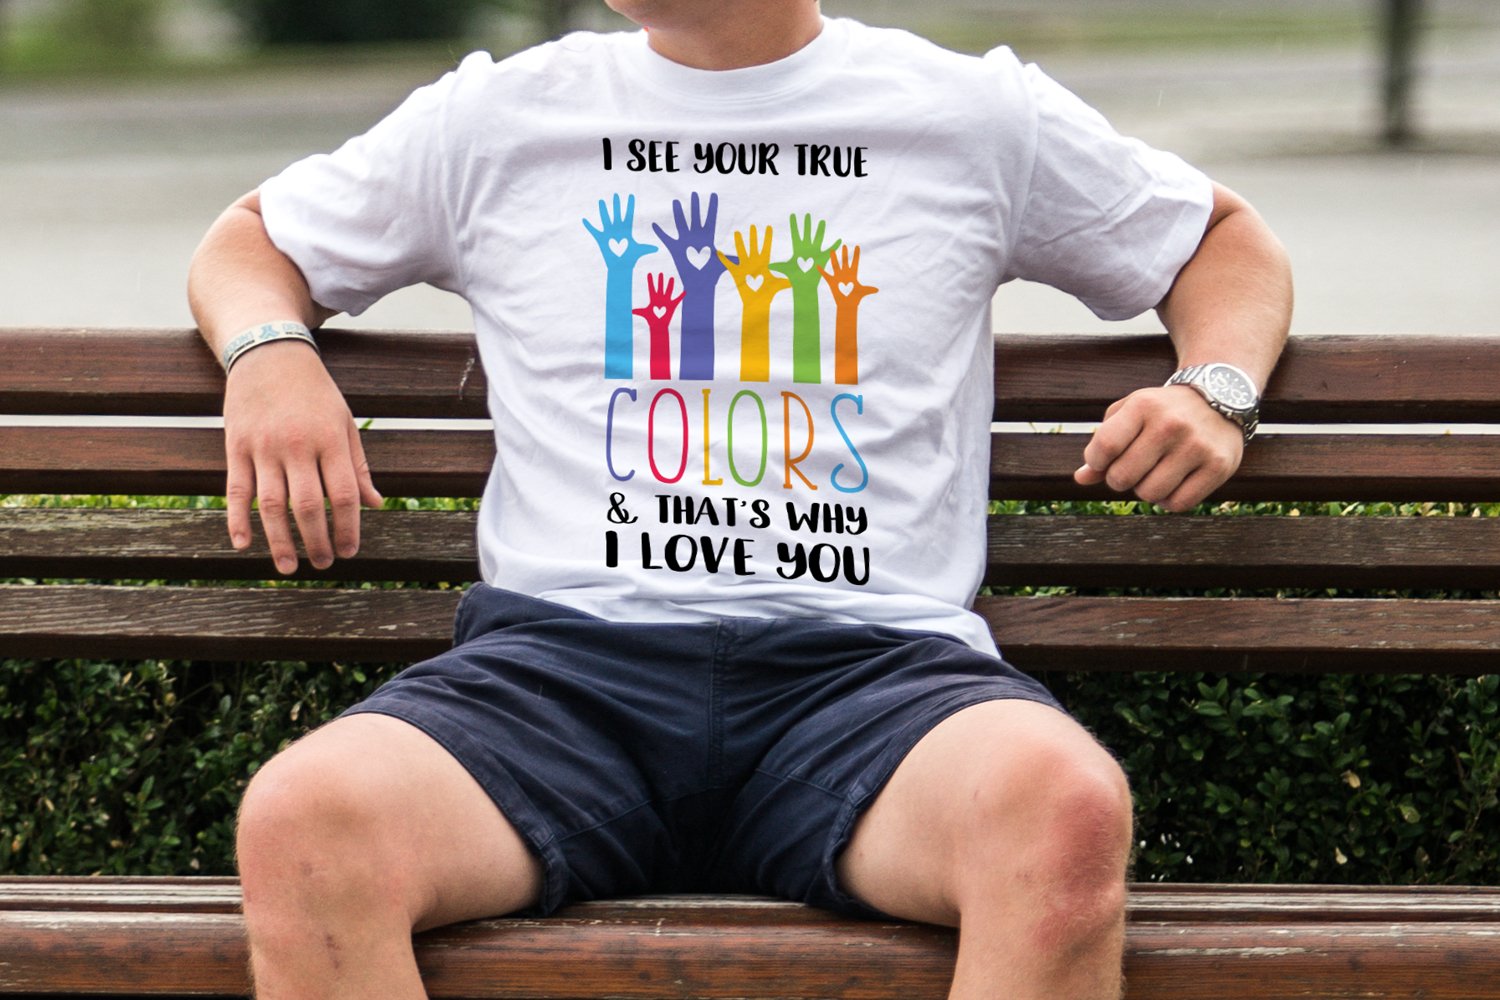 White t-shirt for support people with autism.